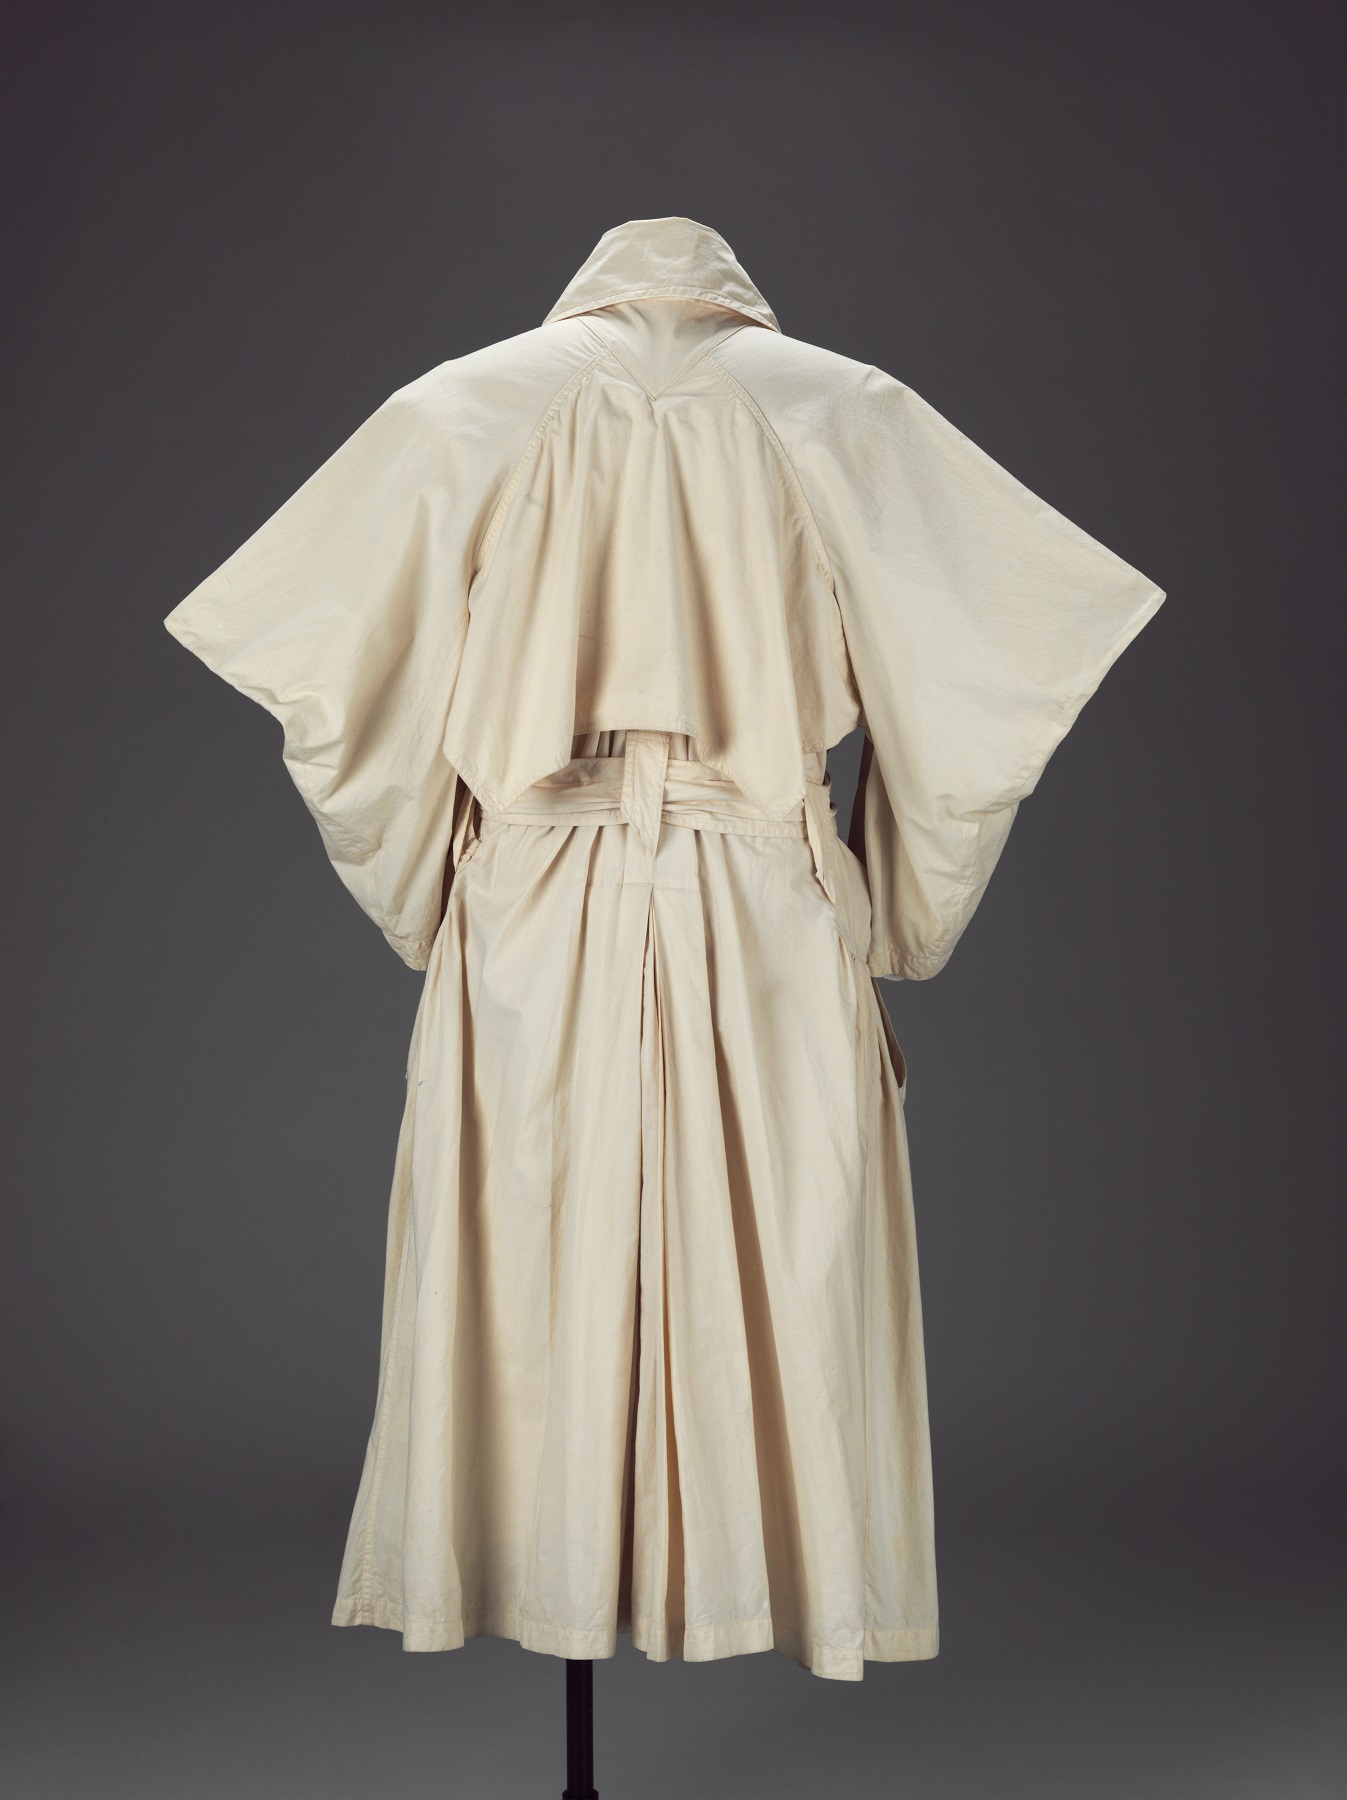 Raincoat 'Witches' 1983 Vivienne Westwood and Malcolm McLaren Given by David Barber, in memory of Rupert Michael Dolan T.268:1, 2-1991 © Victoria and Albert Museum, London